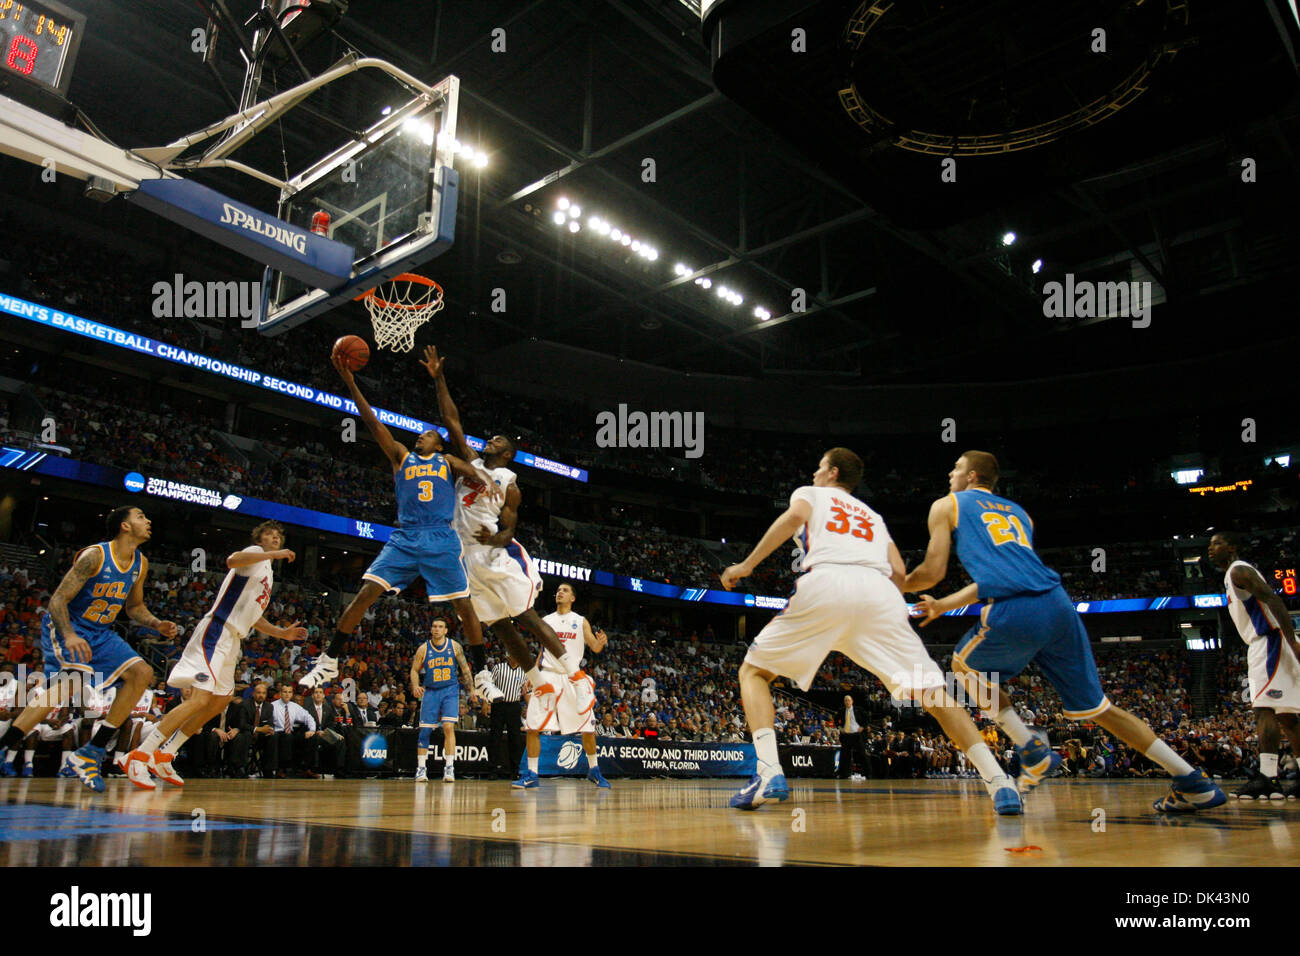 Mar. 19, 2011 - Tampa - CHRIS ZUPPA   |   Times.SP 335803 ZUPP NCAA 1.(Tampa, 03/19/2011) UCLA's Malcolm Lee shoots with Florida's Patric Young defending. 2011 NCAA Basketball tournament at the St. Petersburg Times Forum. 12:15 p.m. game is No. 5 West Virginia vs. No. 4 Kentucky. The second game is No. 7 UCLA vs. No. 2 Florida. [CHRIS ZUPPA, Times] (Credit Image: © St. Petersburg T Stock Photo